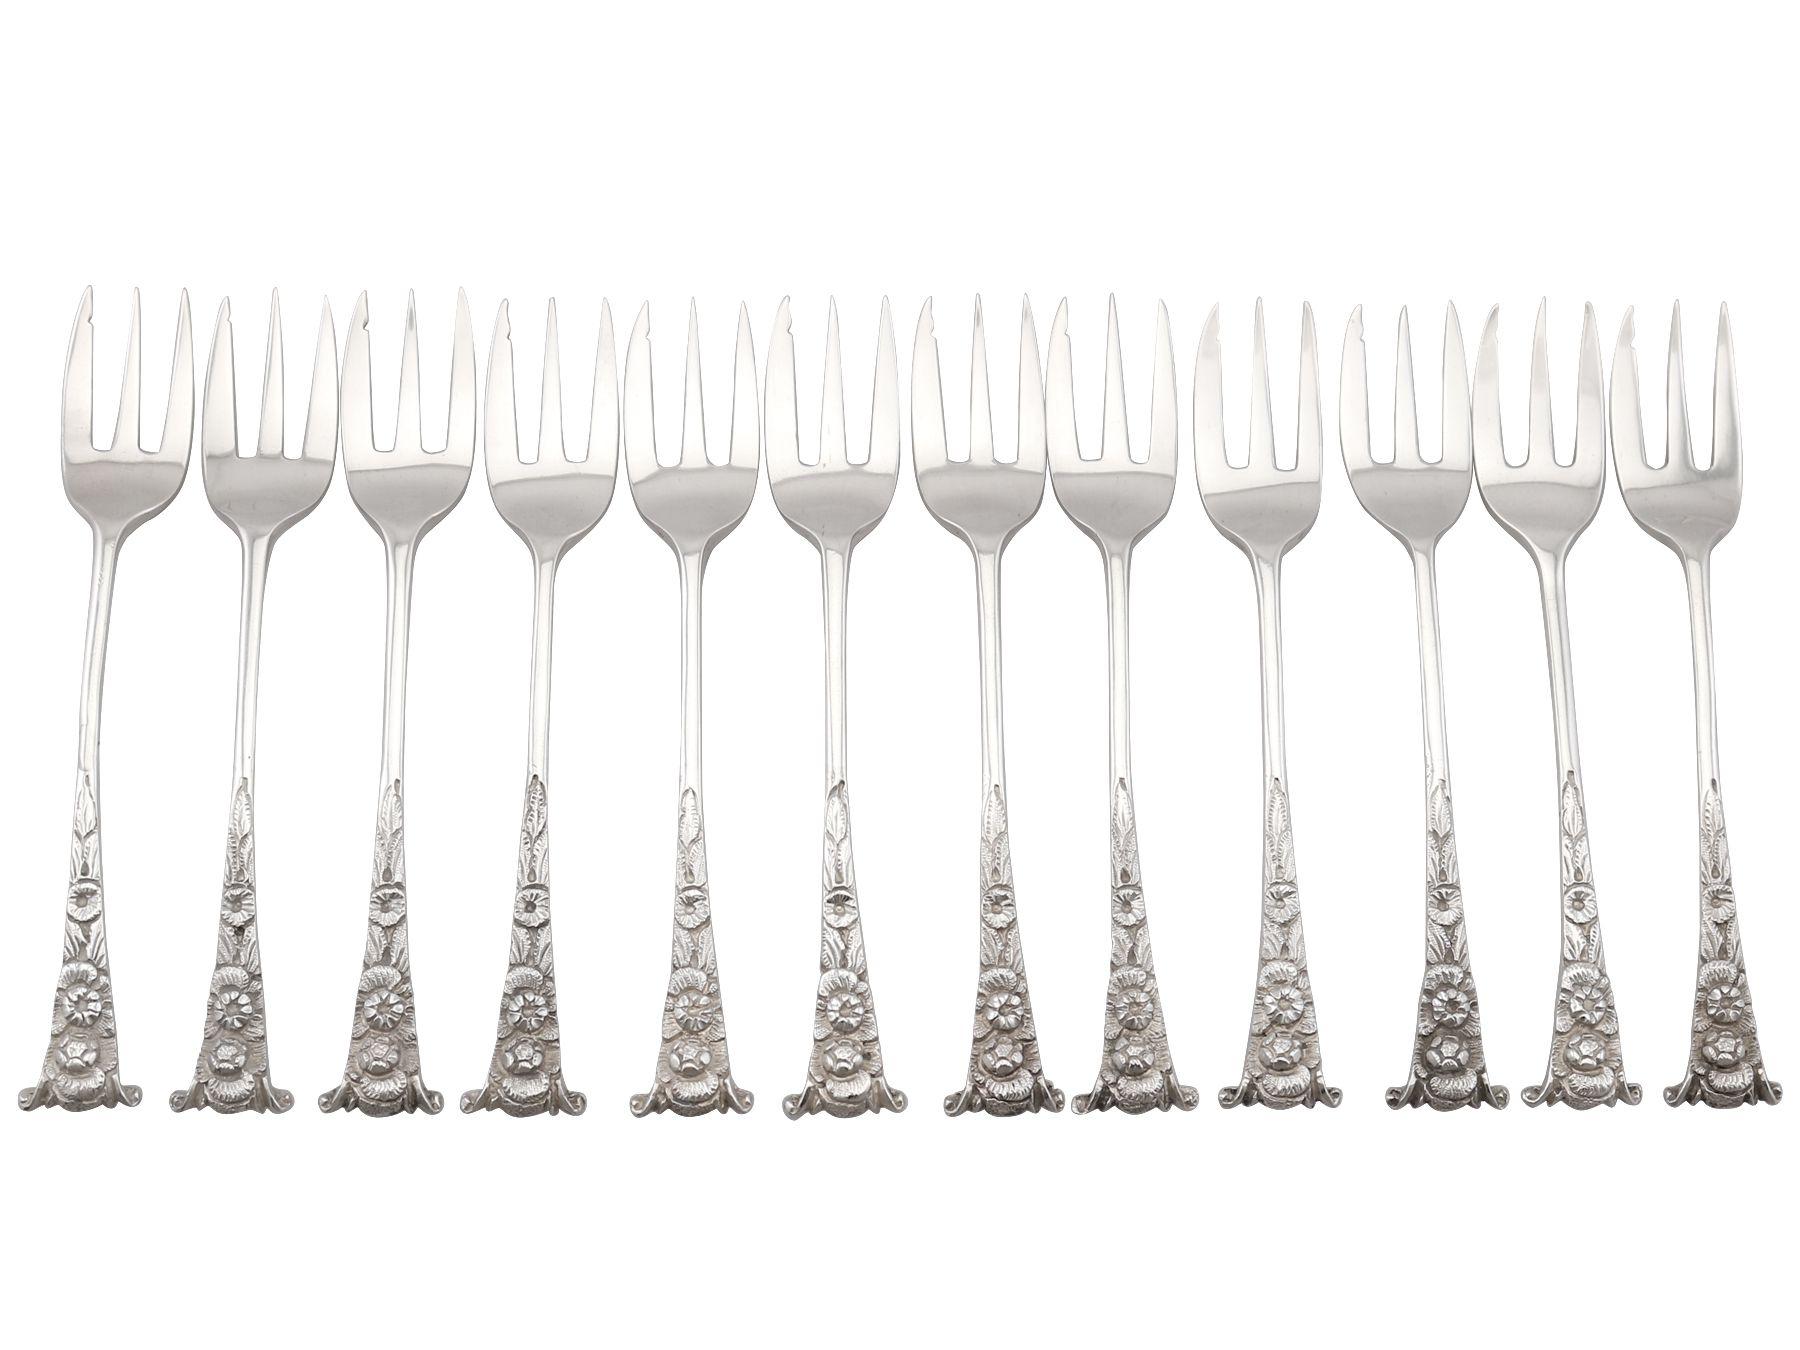 An exceptional, fine and impressive antique Victorian English sterling silver hors d'oeuvre fork set for twelve persons - boxed; an addition to our silver flatware collection.

These exceptional antique Victorian sterling silver hors d'oeuvre